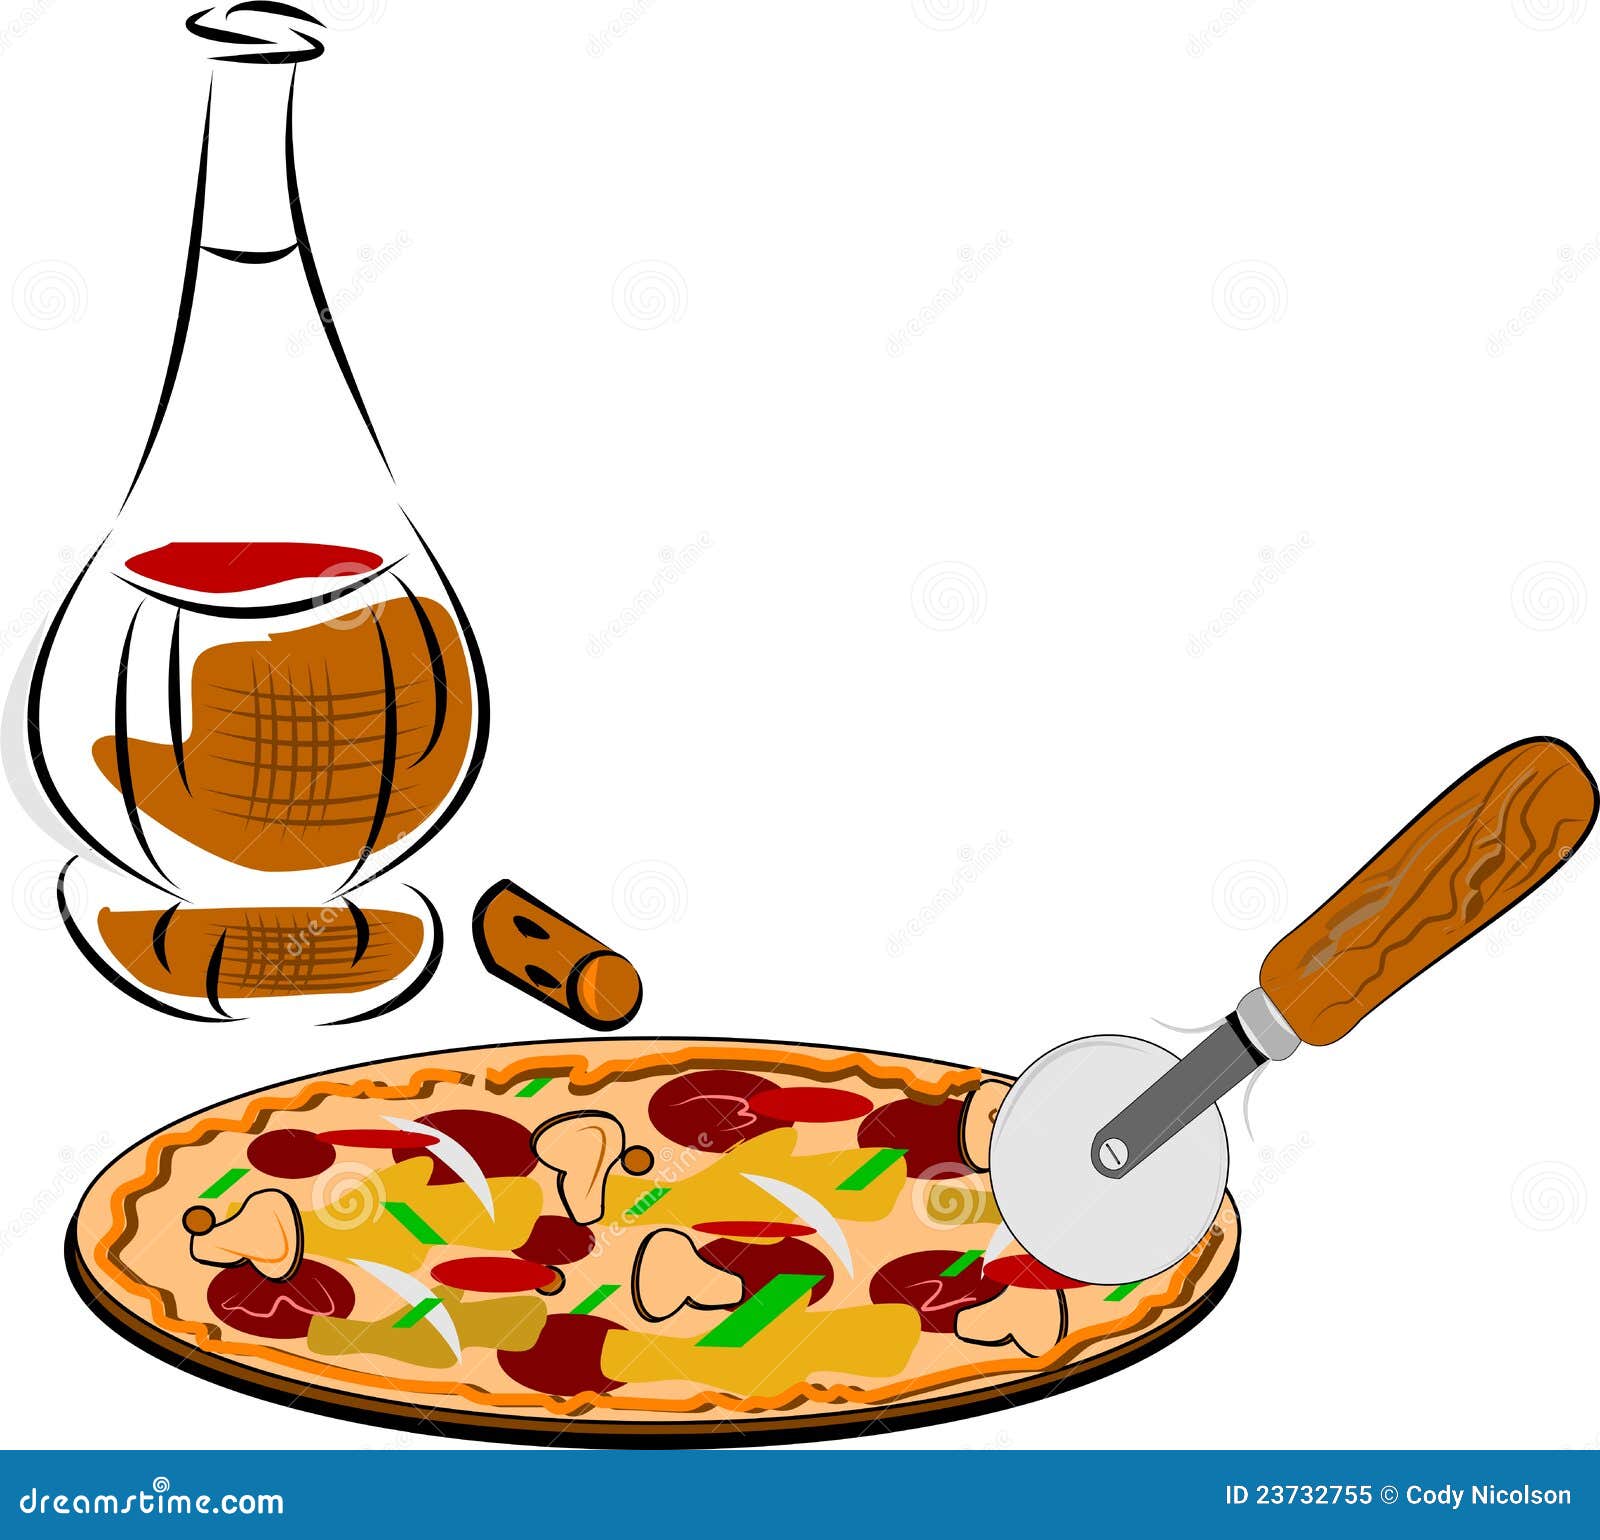 Pizza and wine stock vector. Illustration of concept - 23732755